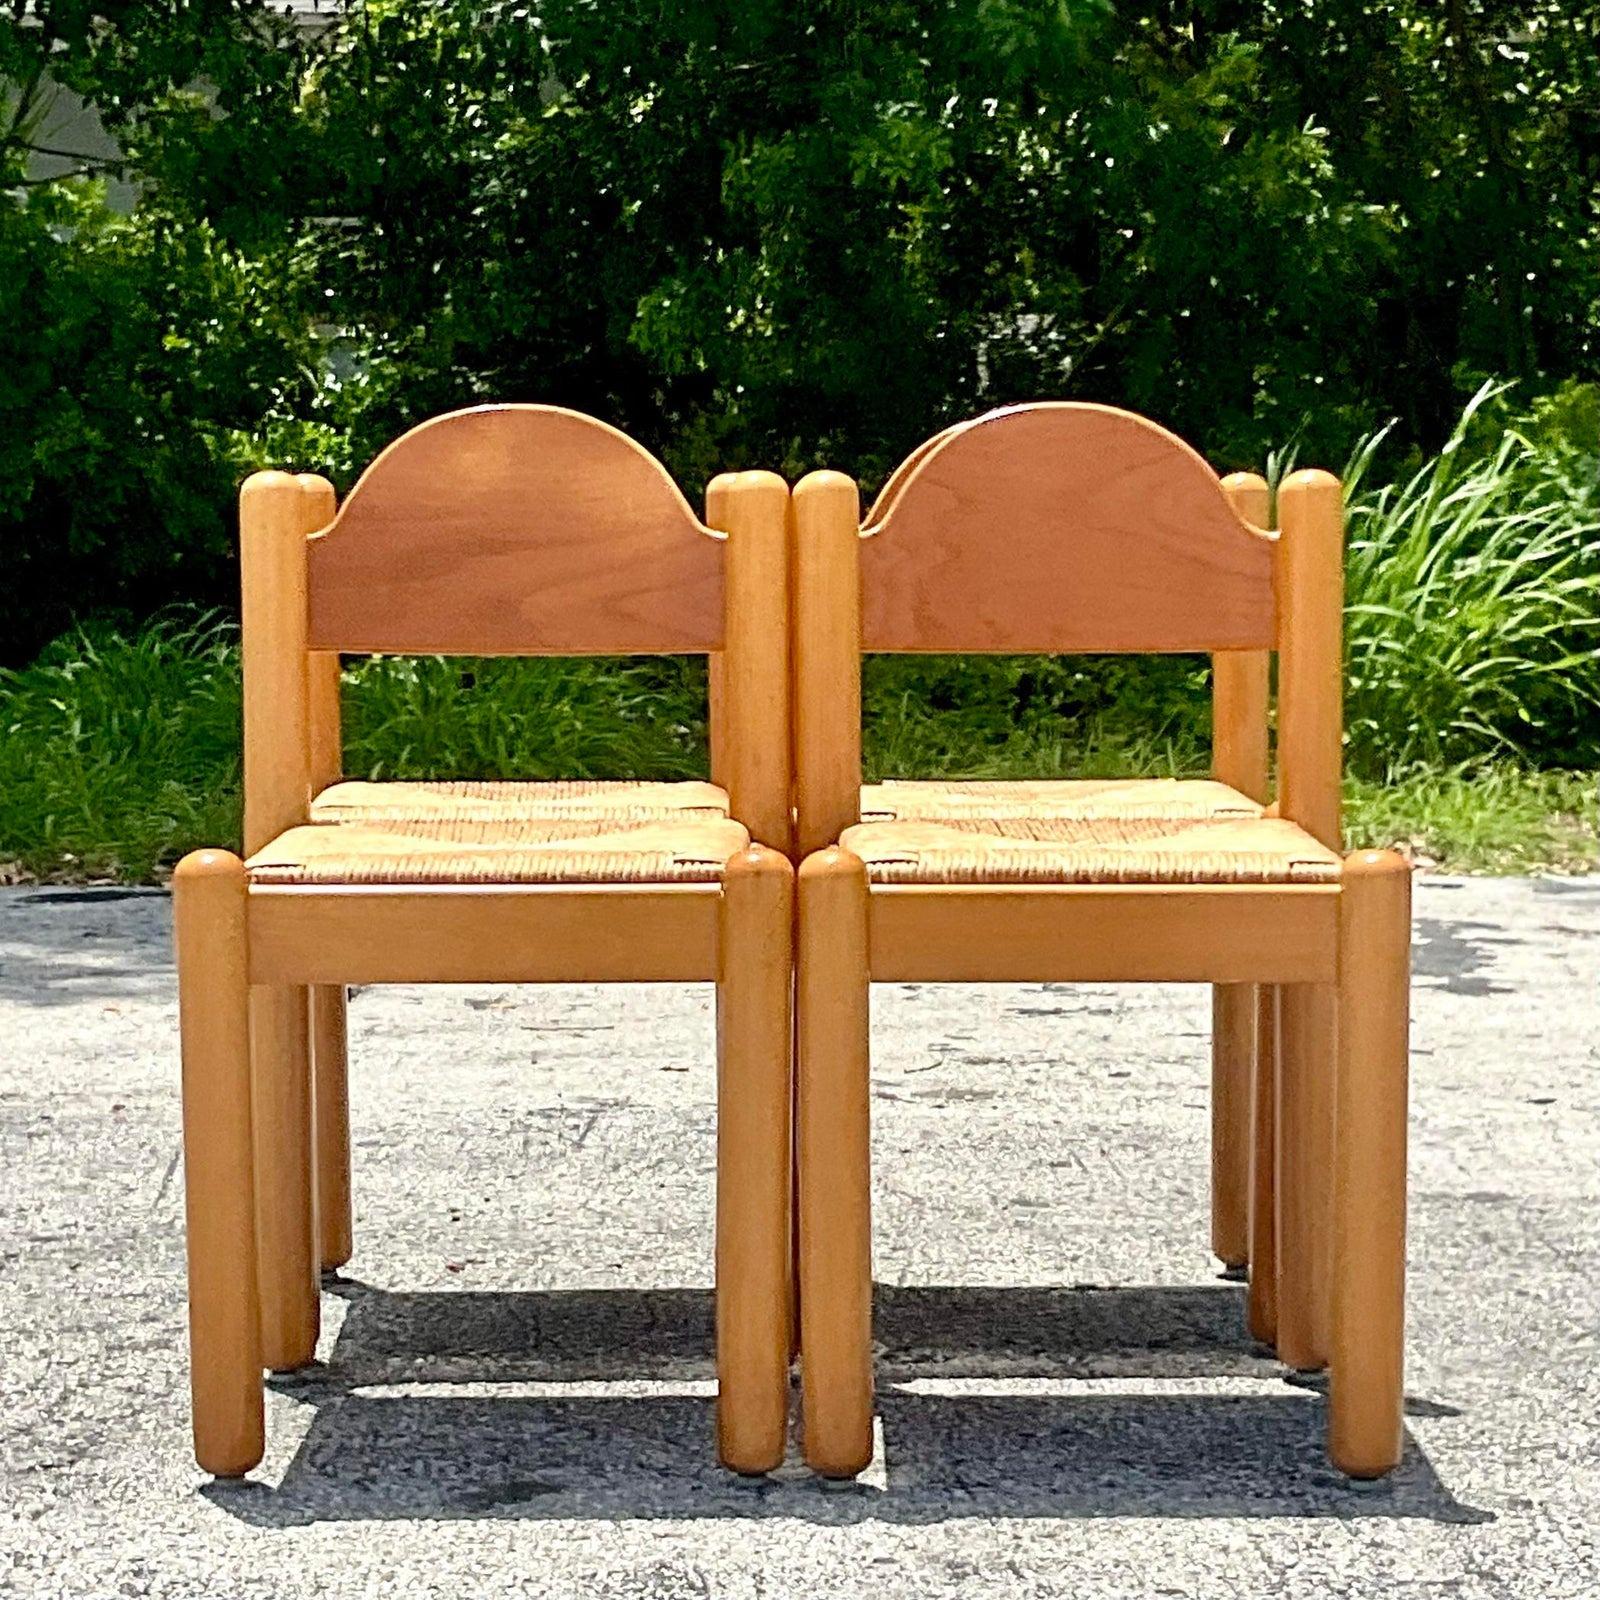 Vintage Boho Italian Padova Chairs After Hank Lowenstein - Set of 4 In Good Condition For Sale In west palm beach, FL